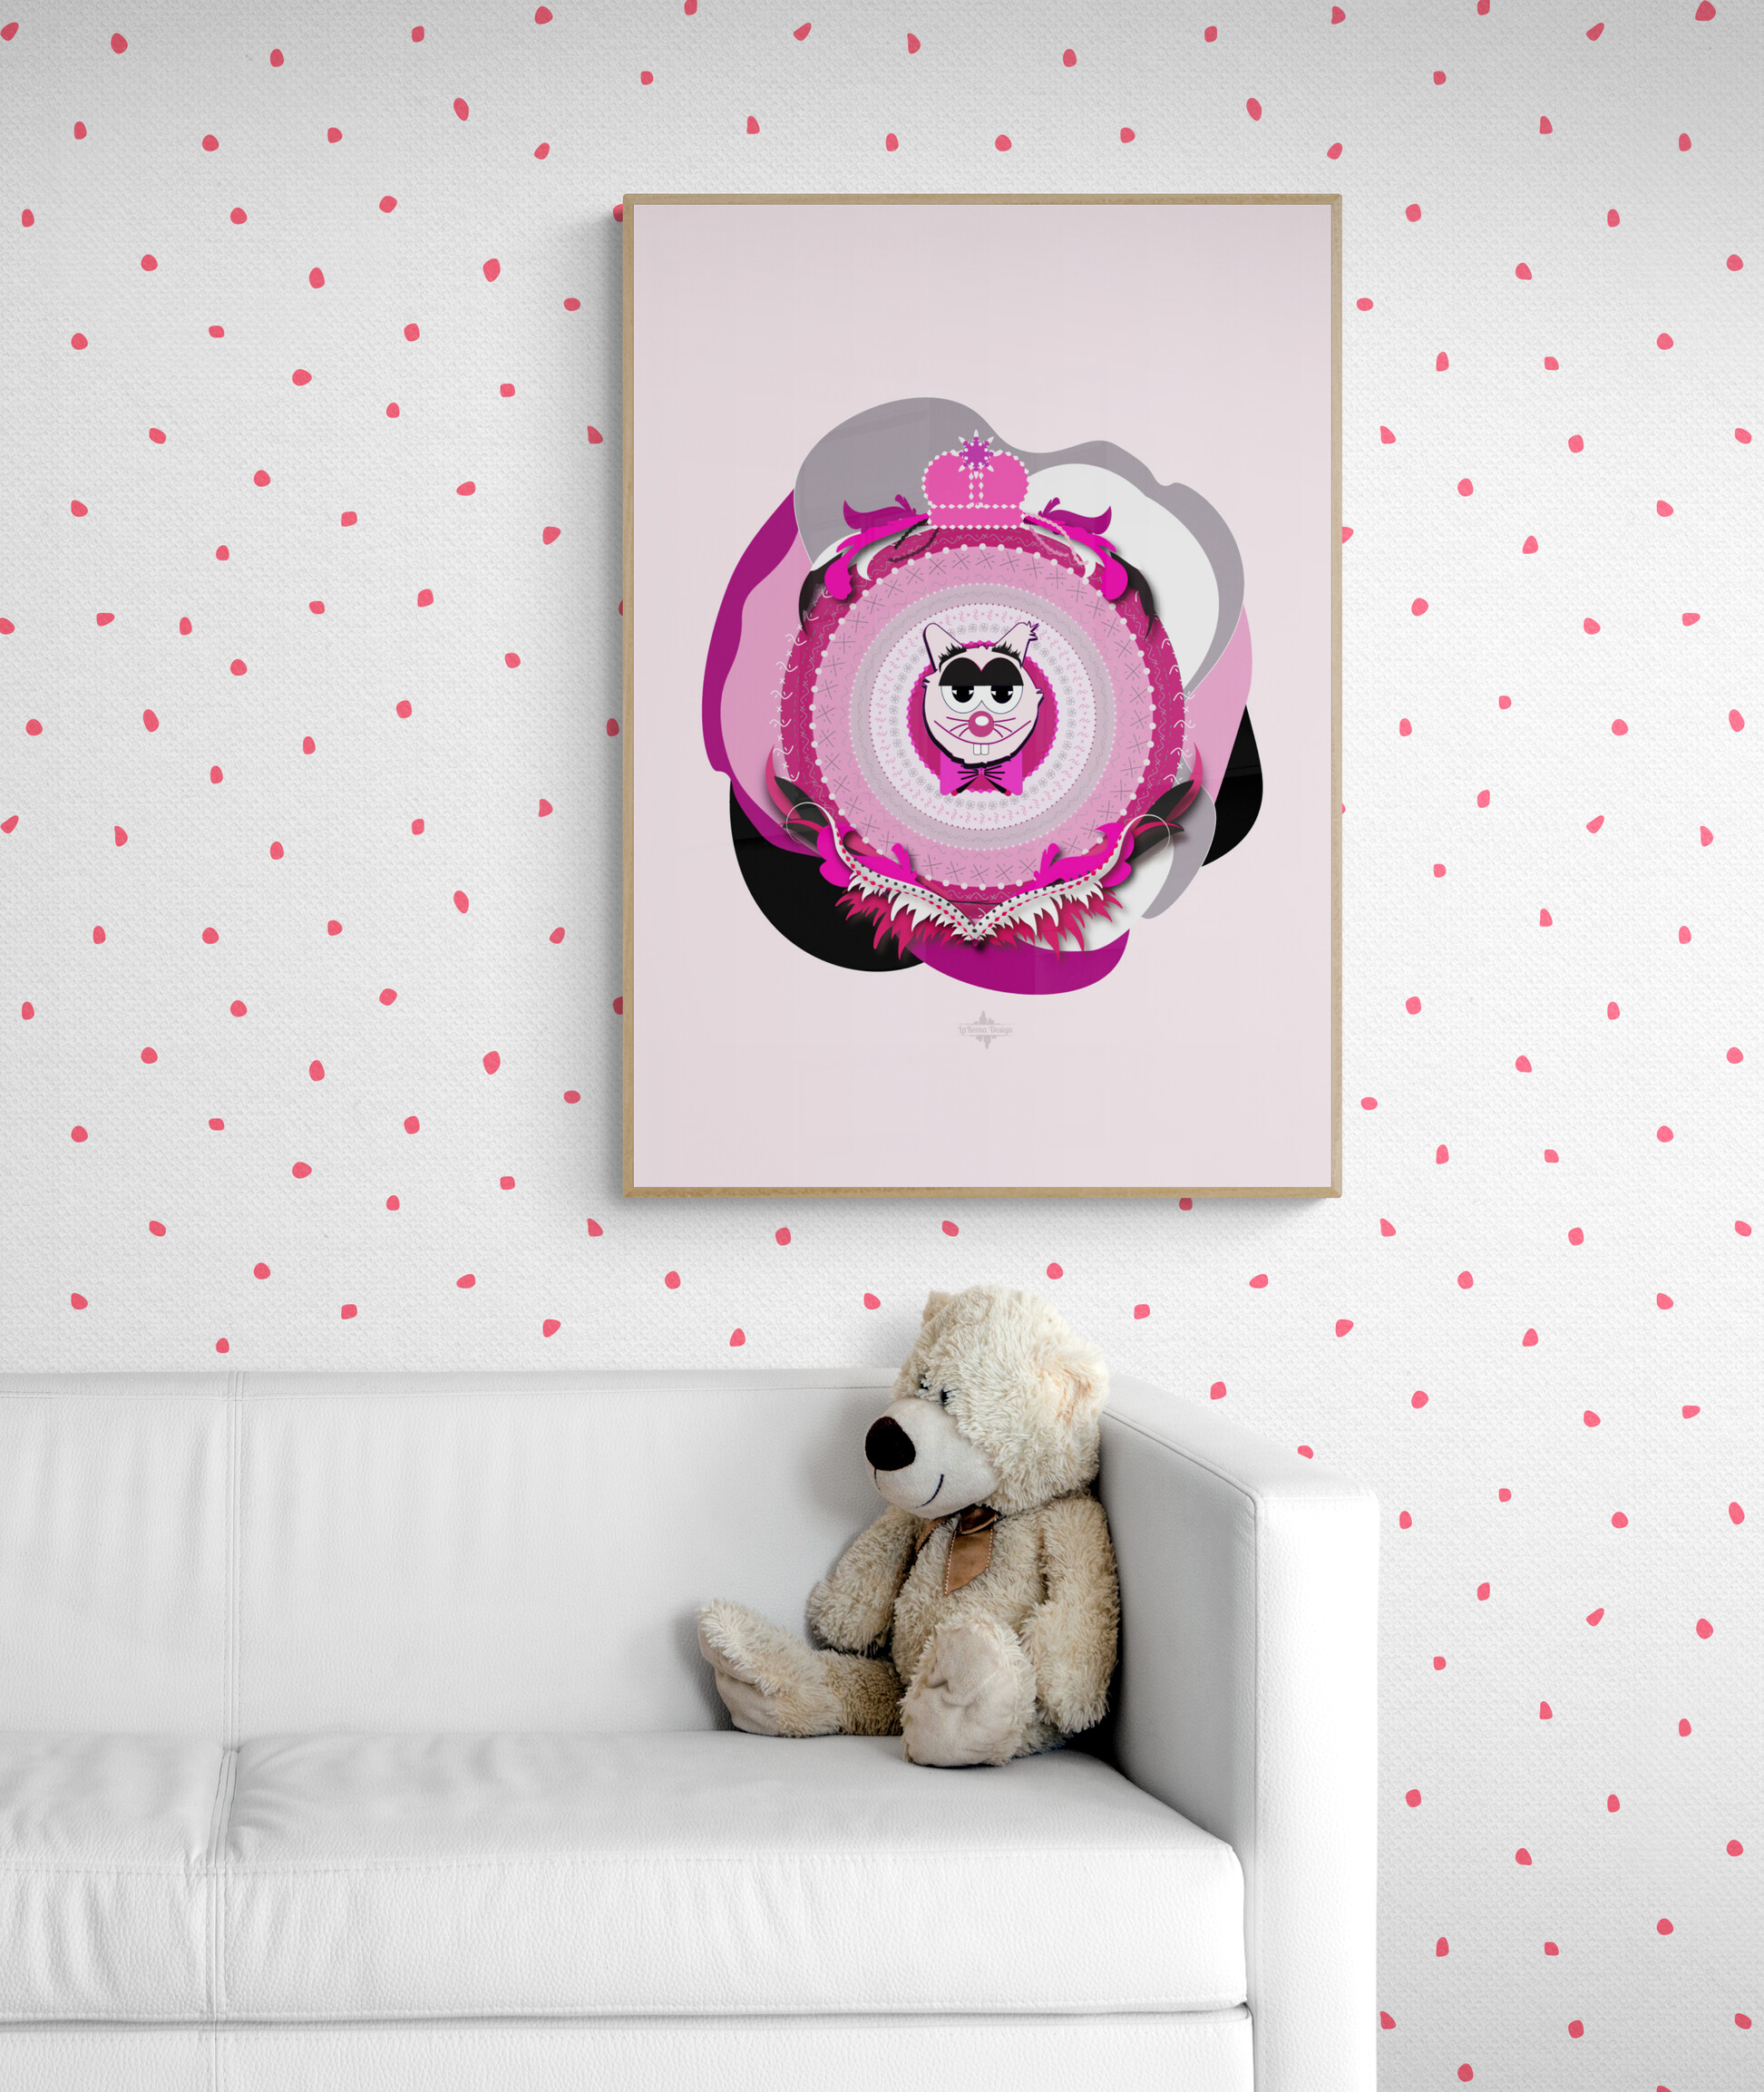 Framed poster featuring Magenta Superdad Cat. The cartoon cat has a funny expression with prominent teeth and wears a big bow tie. The Superdad Cat poster hangs on a dotted wallpaper wall above a sofa, with a teddy bear nearby.